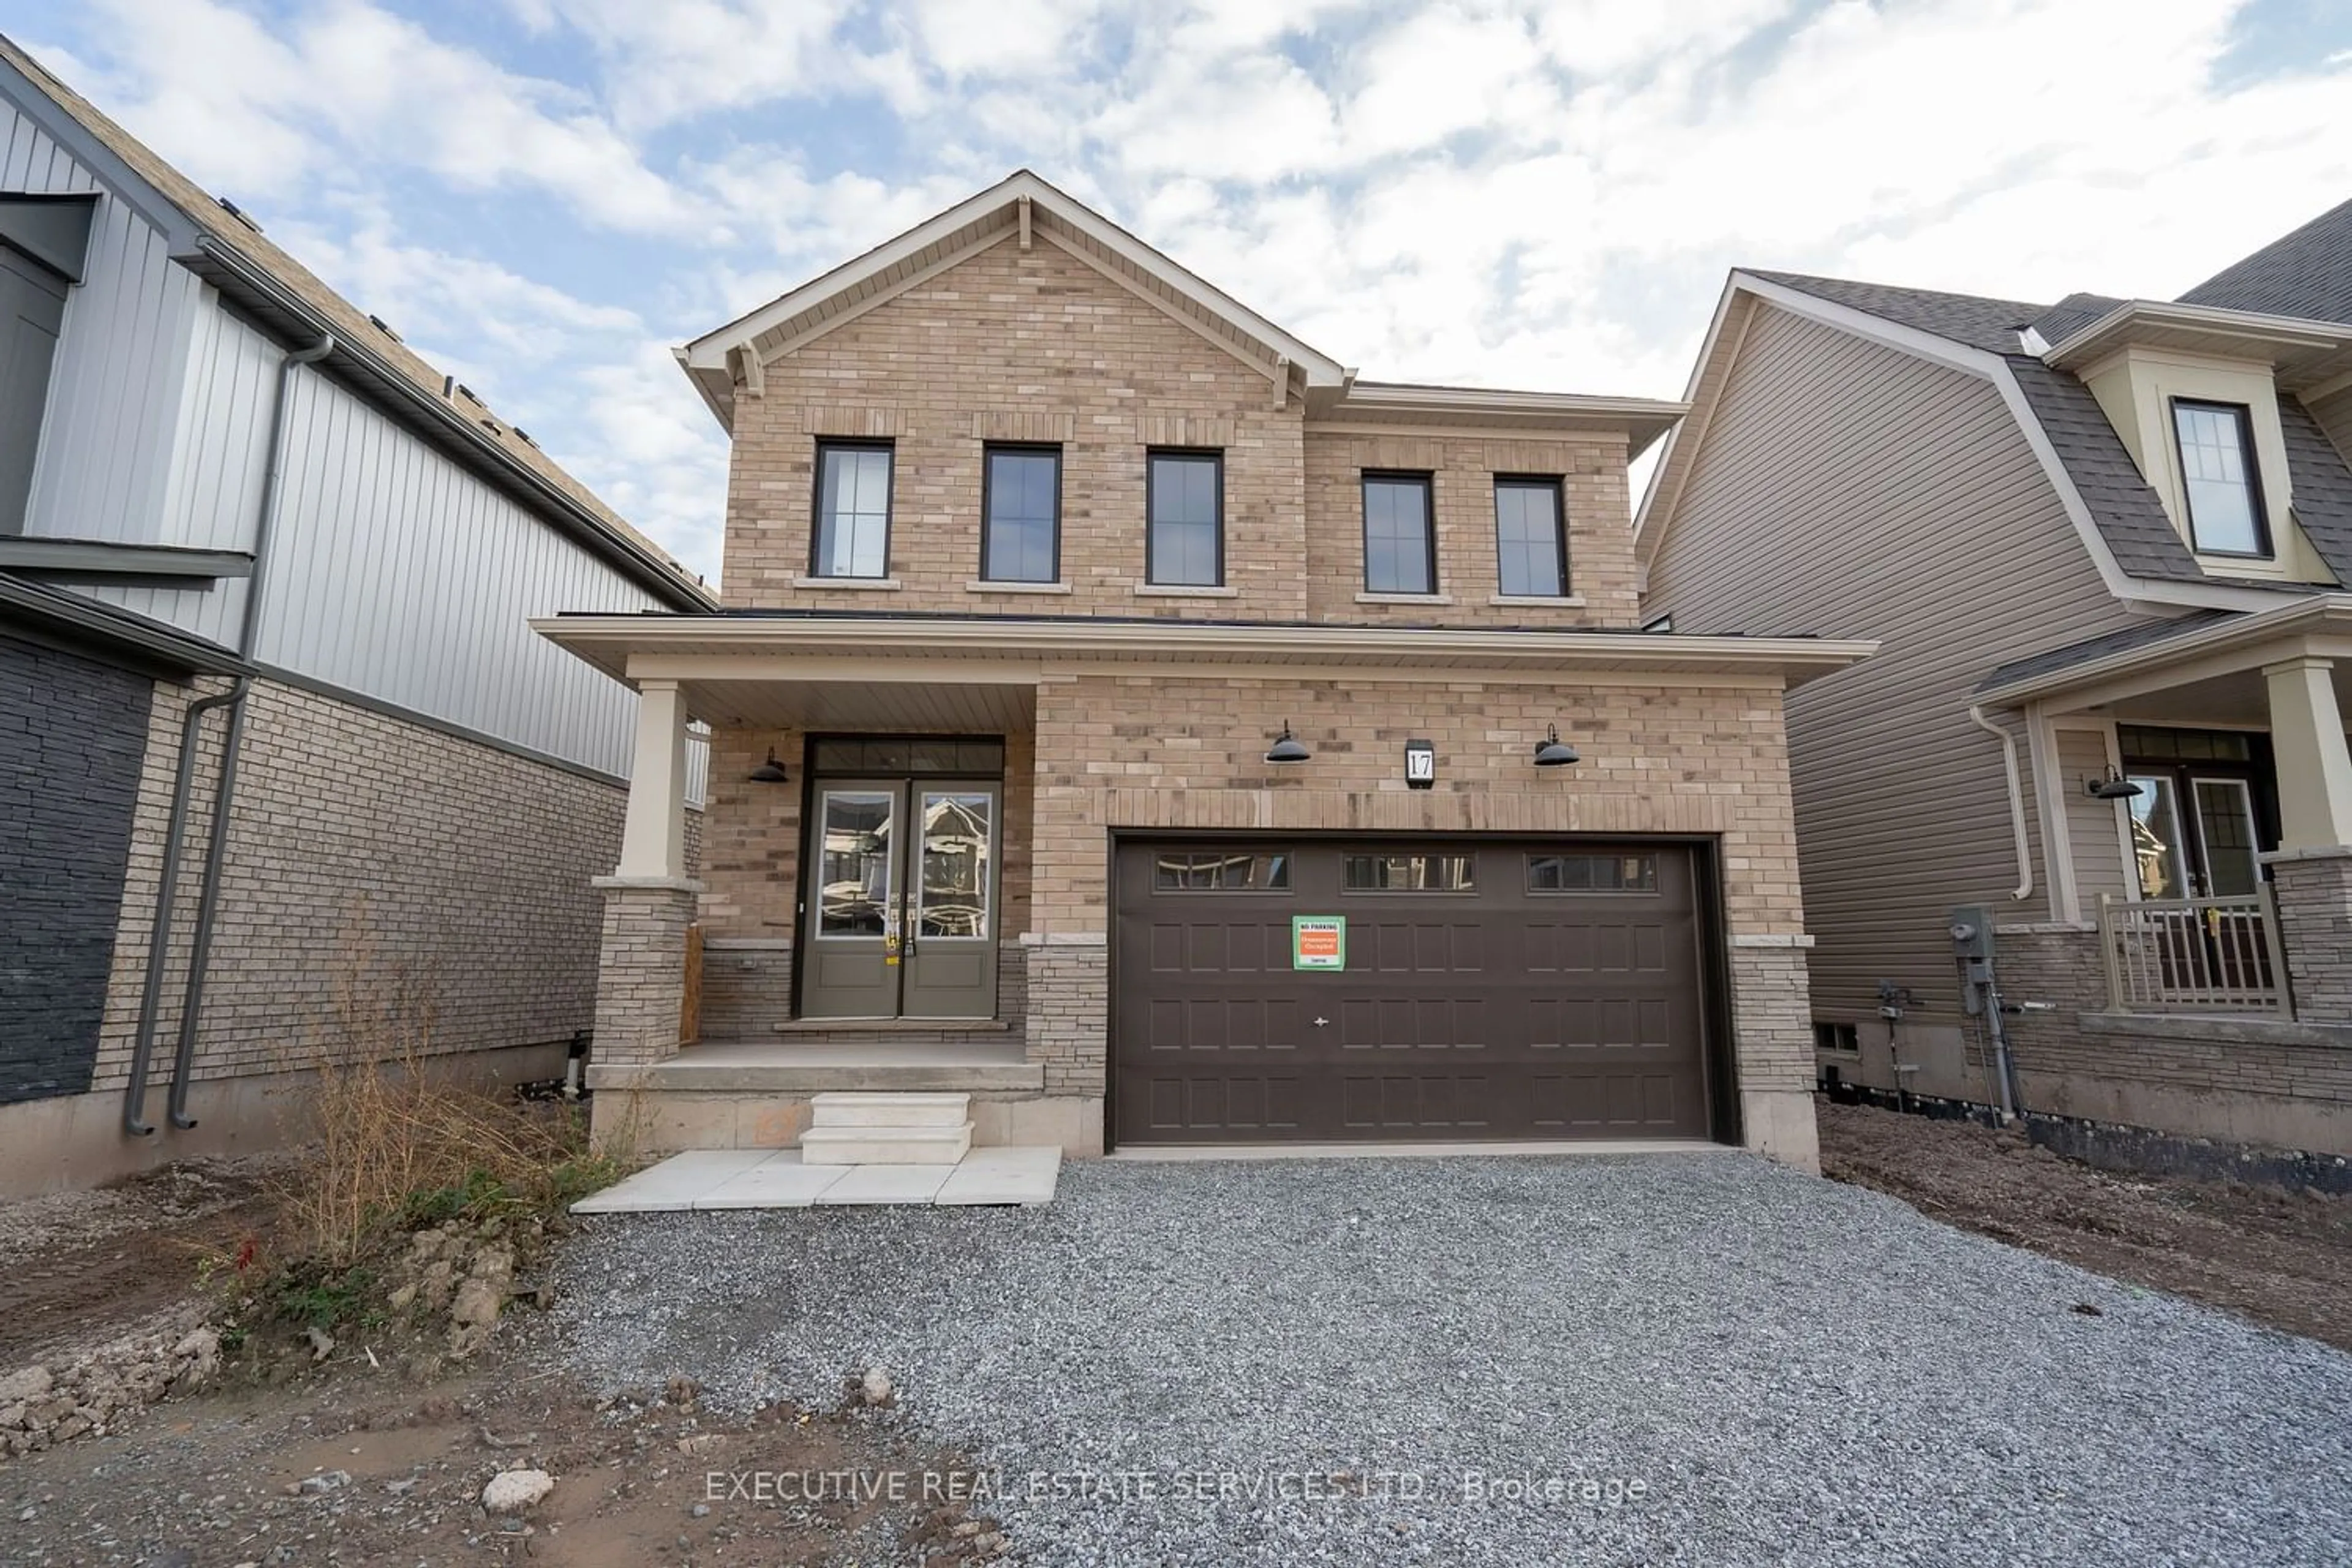 Home with brick exterior material for 17 Downriver Dr, Welland Ontario L3B 0M5